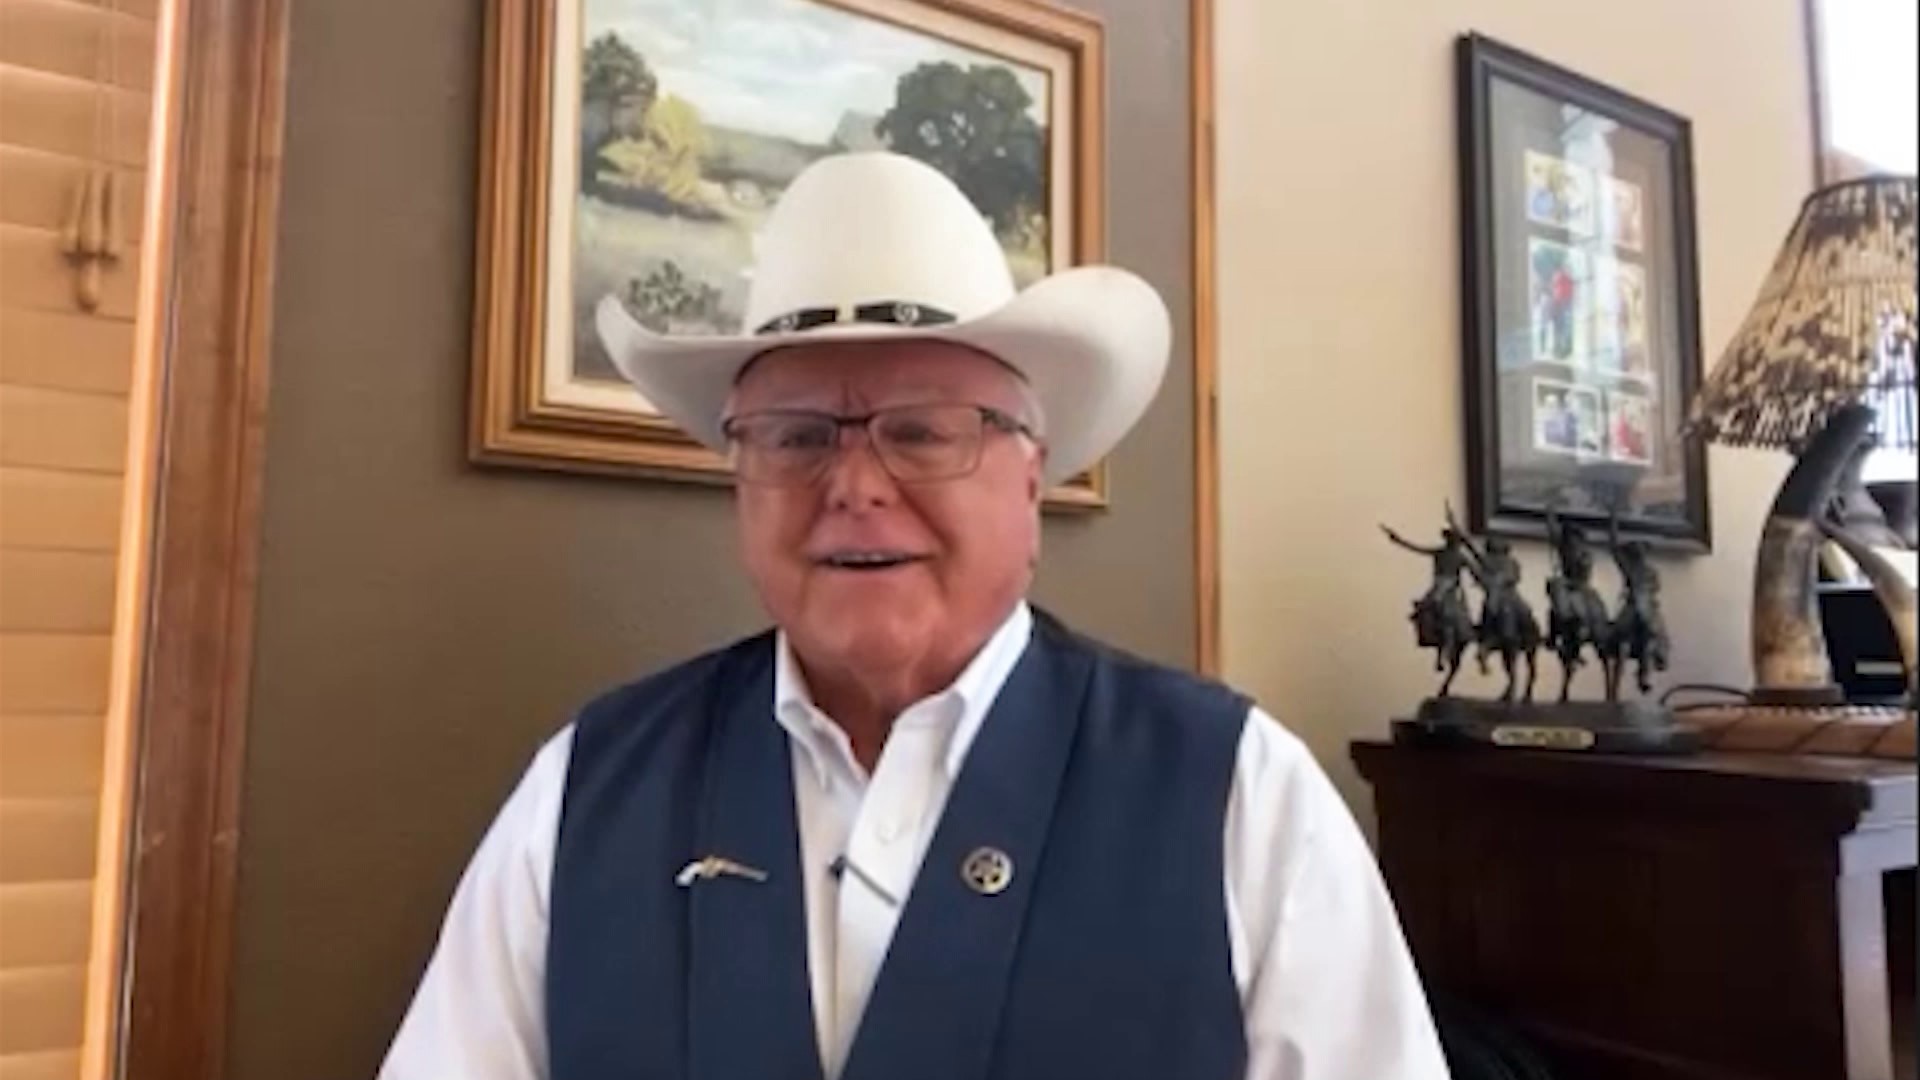 Sid Miller differs from his opponent, Susan Hays, in that he is advocating expanding access to medical marijuana, while she wants to legalize cannabis.